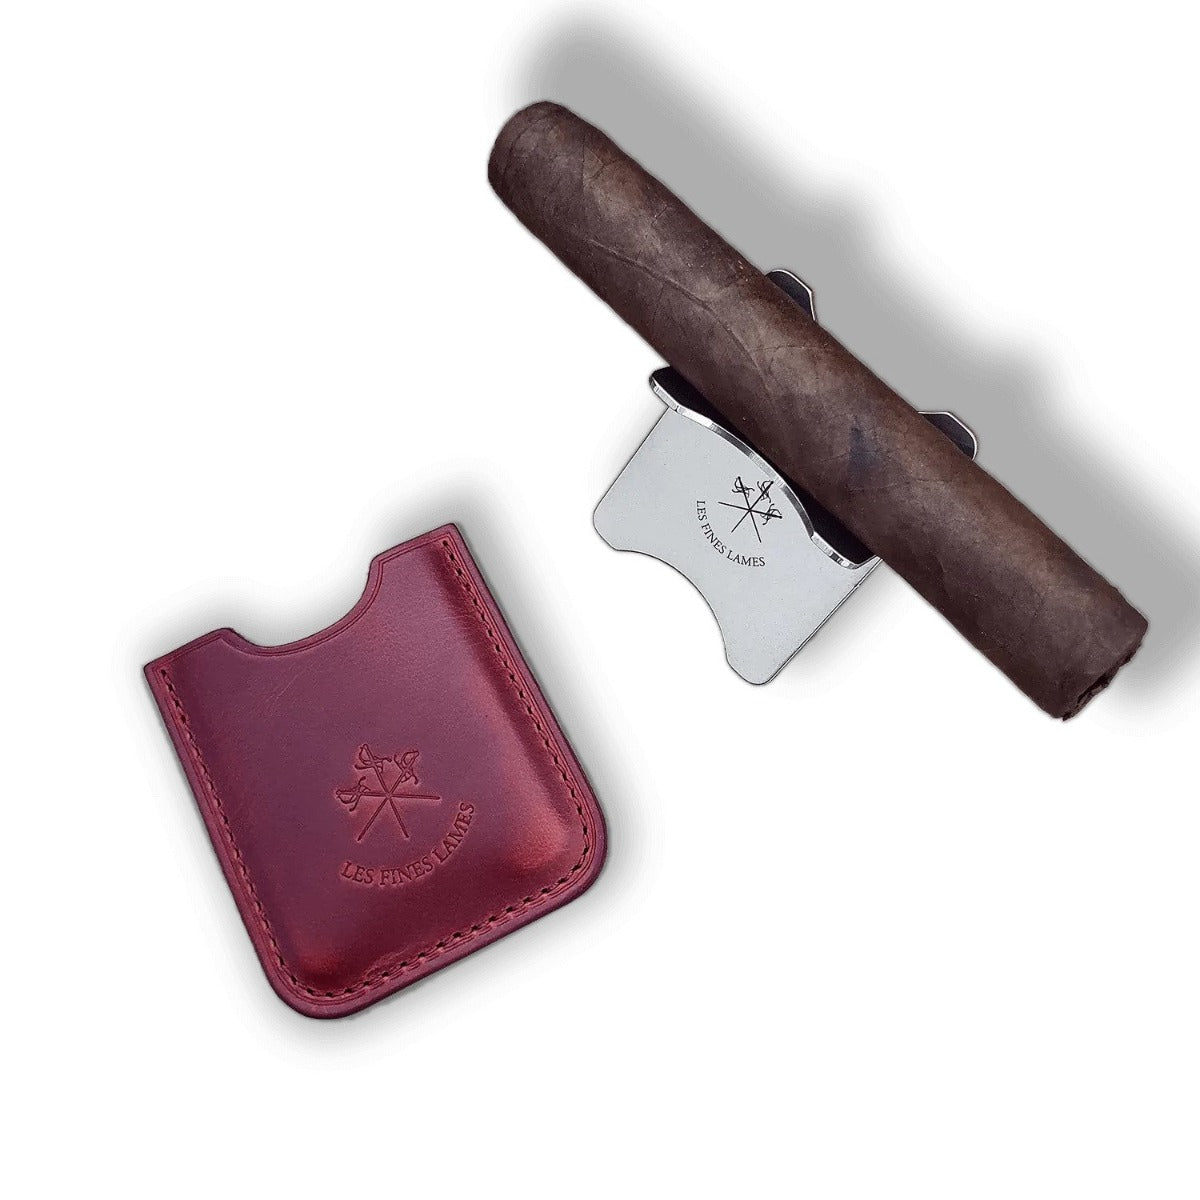 A Kirby Allison Red Cigar Stand with a cigar stand from KirbyAllison.com.